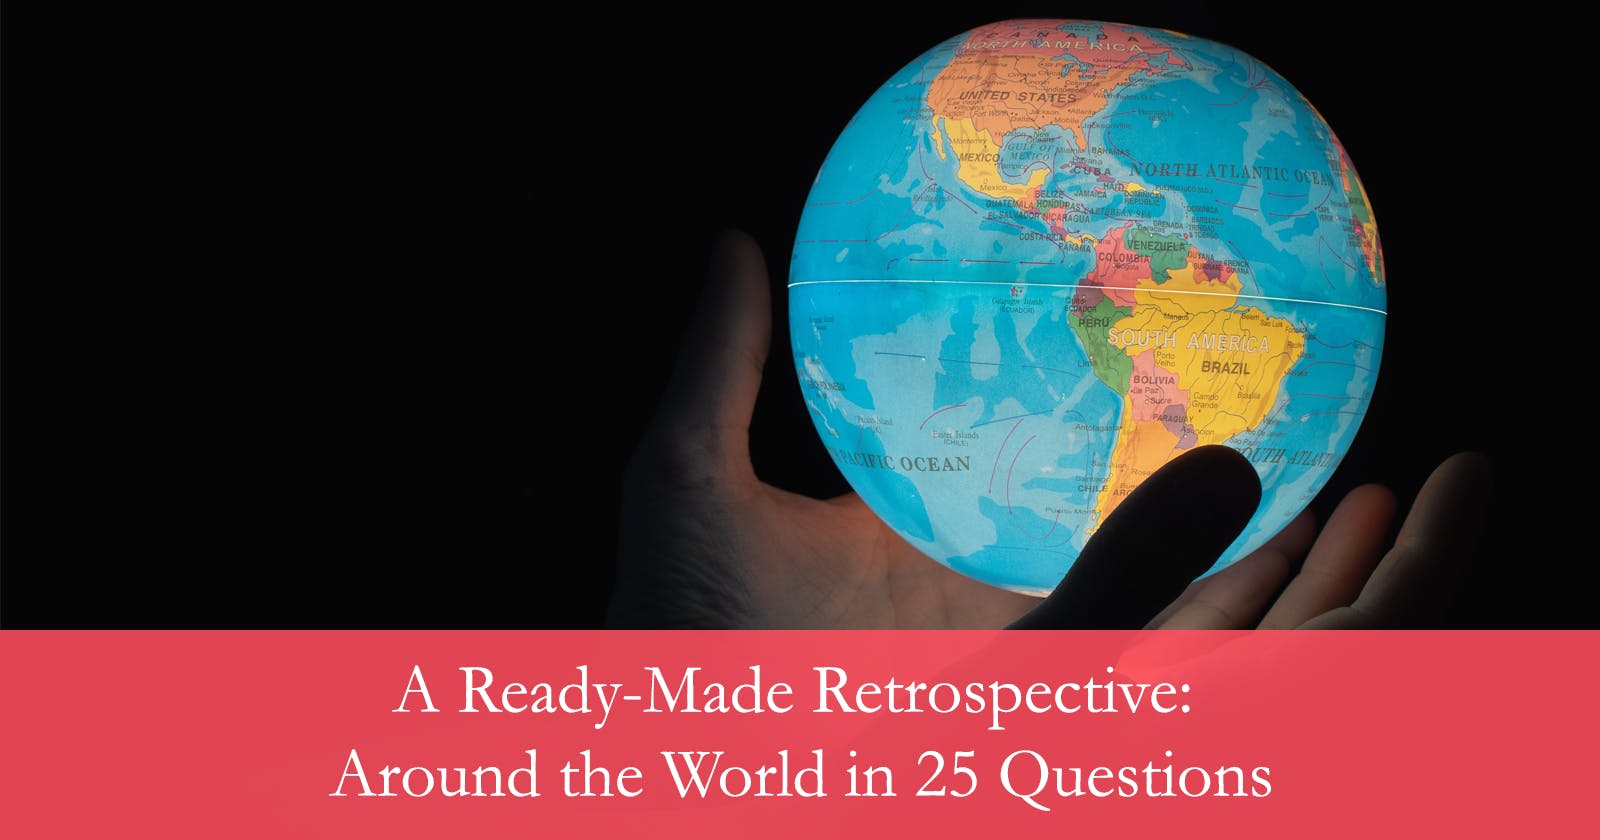 A Ready-Made Retrospective: Around the World in 25 Questions